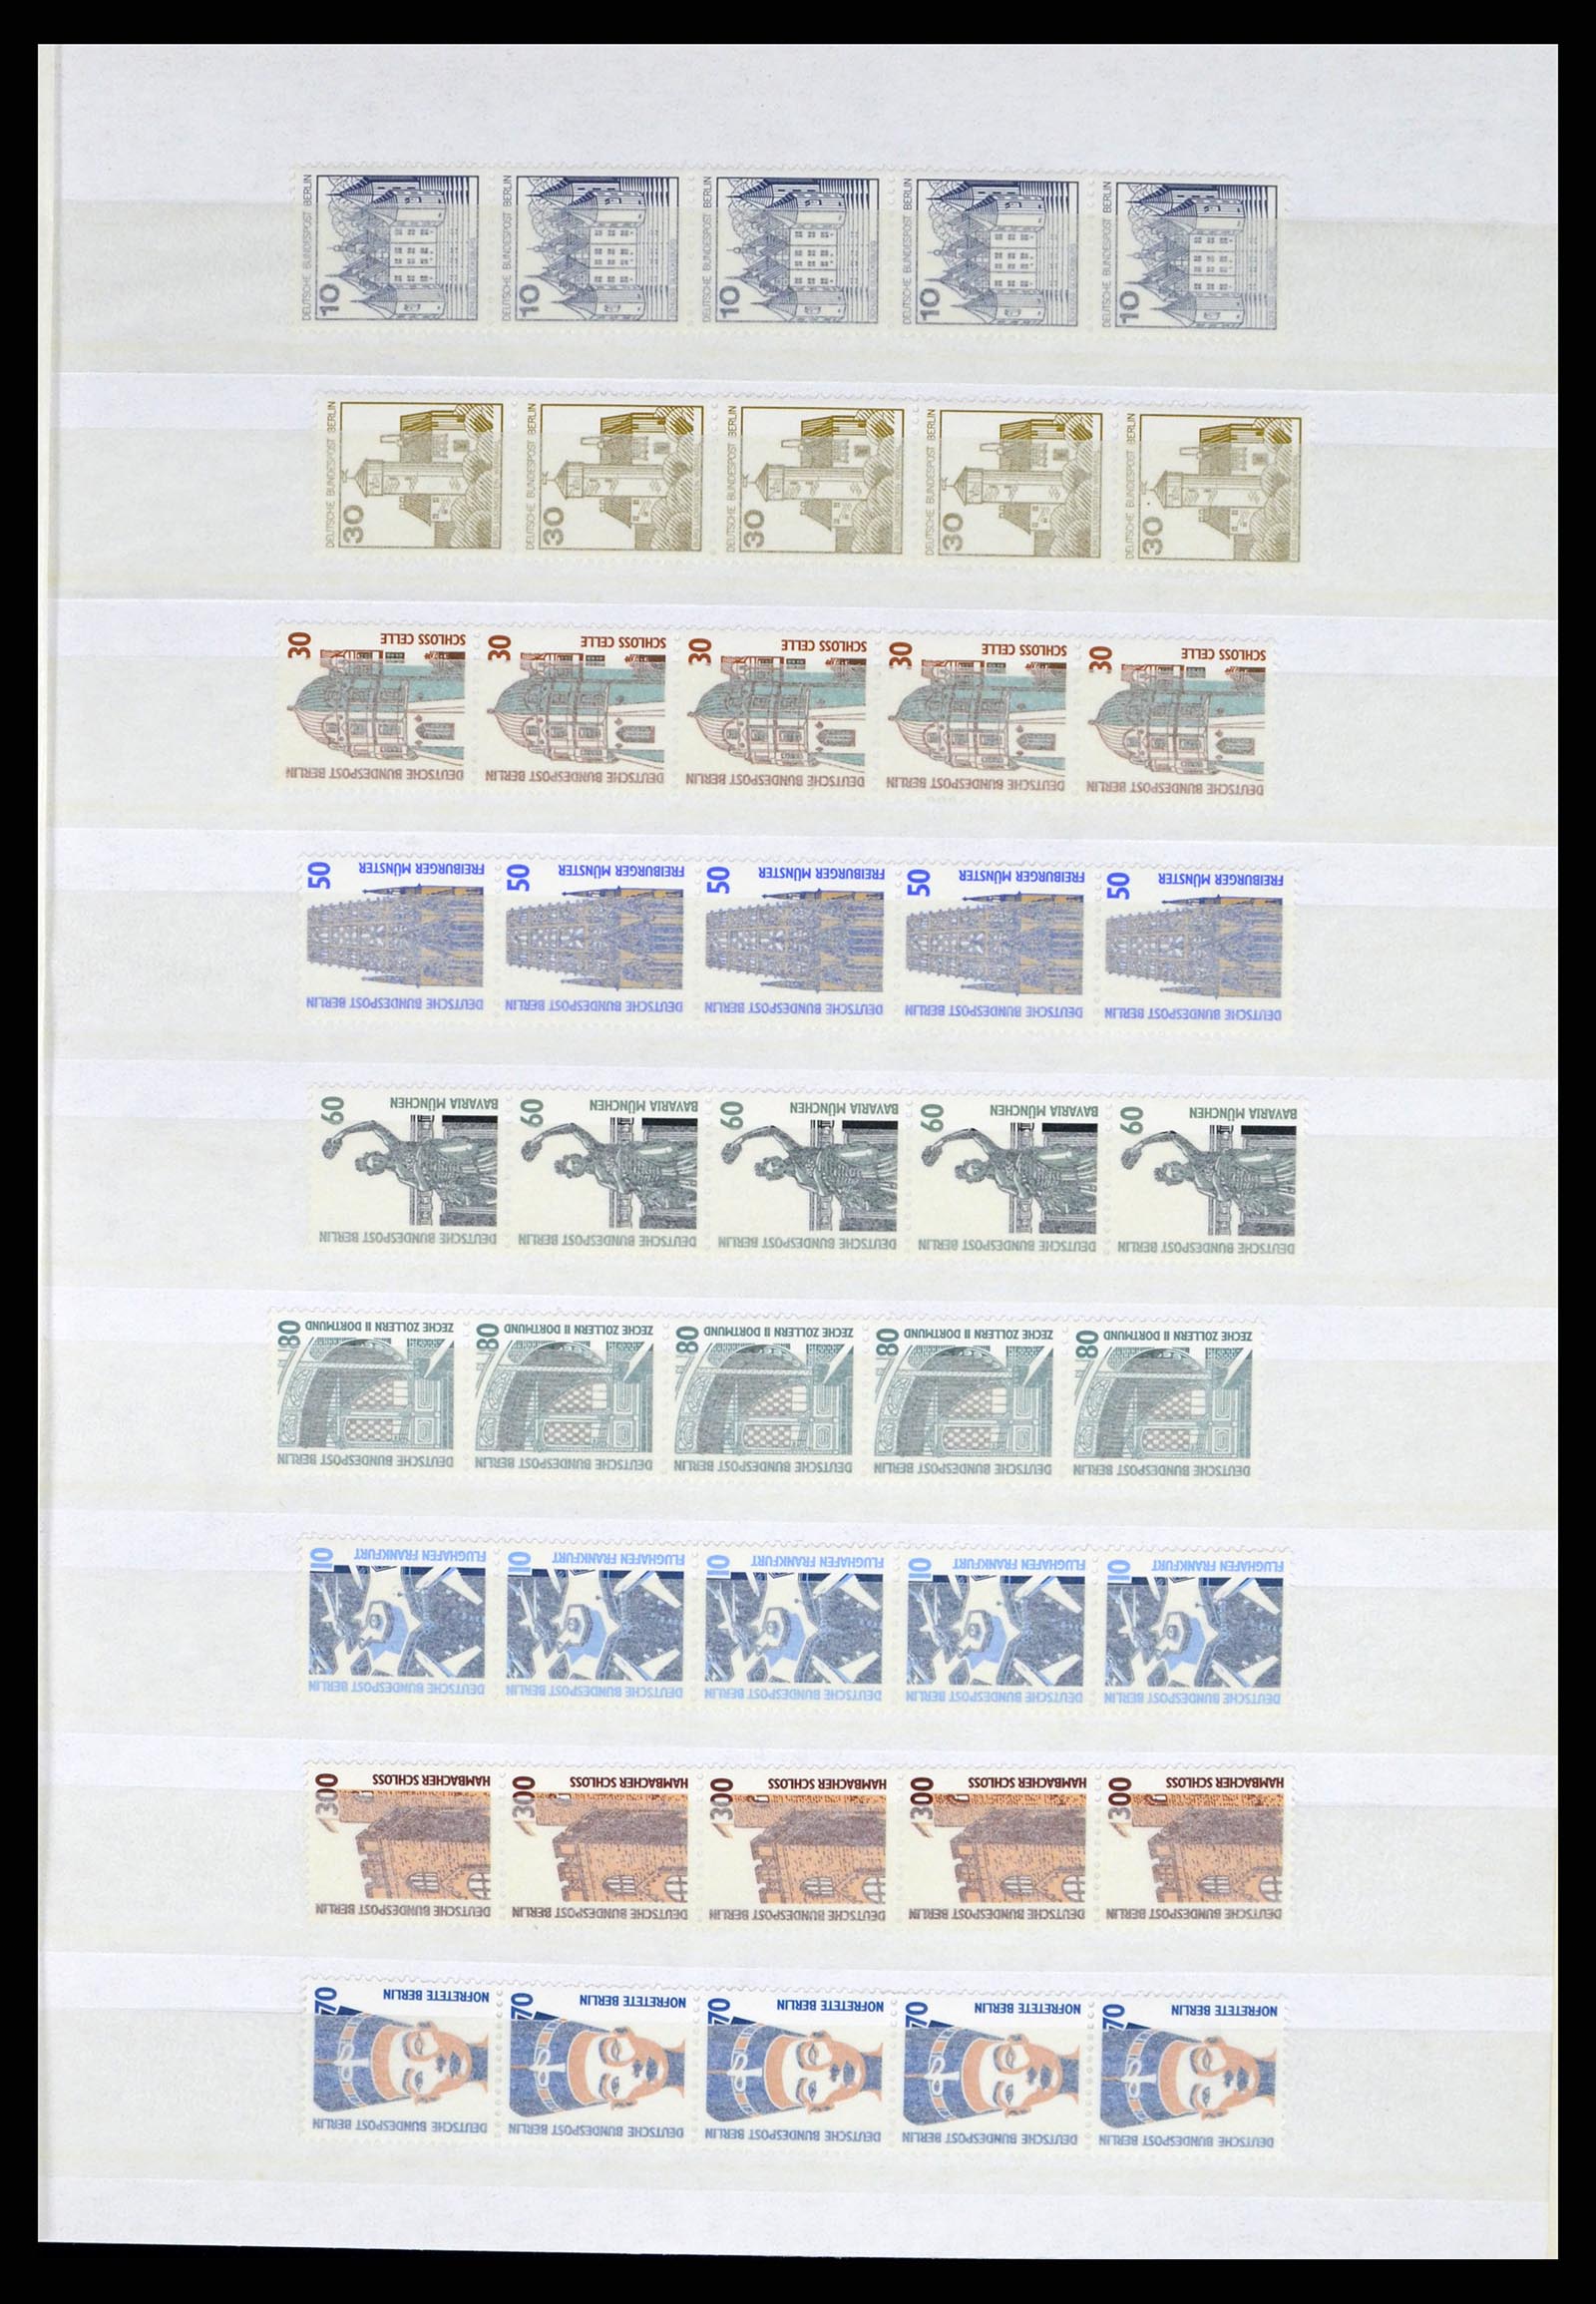 37354 088 - Stamp collection 37354 Bundespost and Berlin 1955-2000.